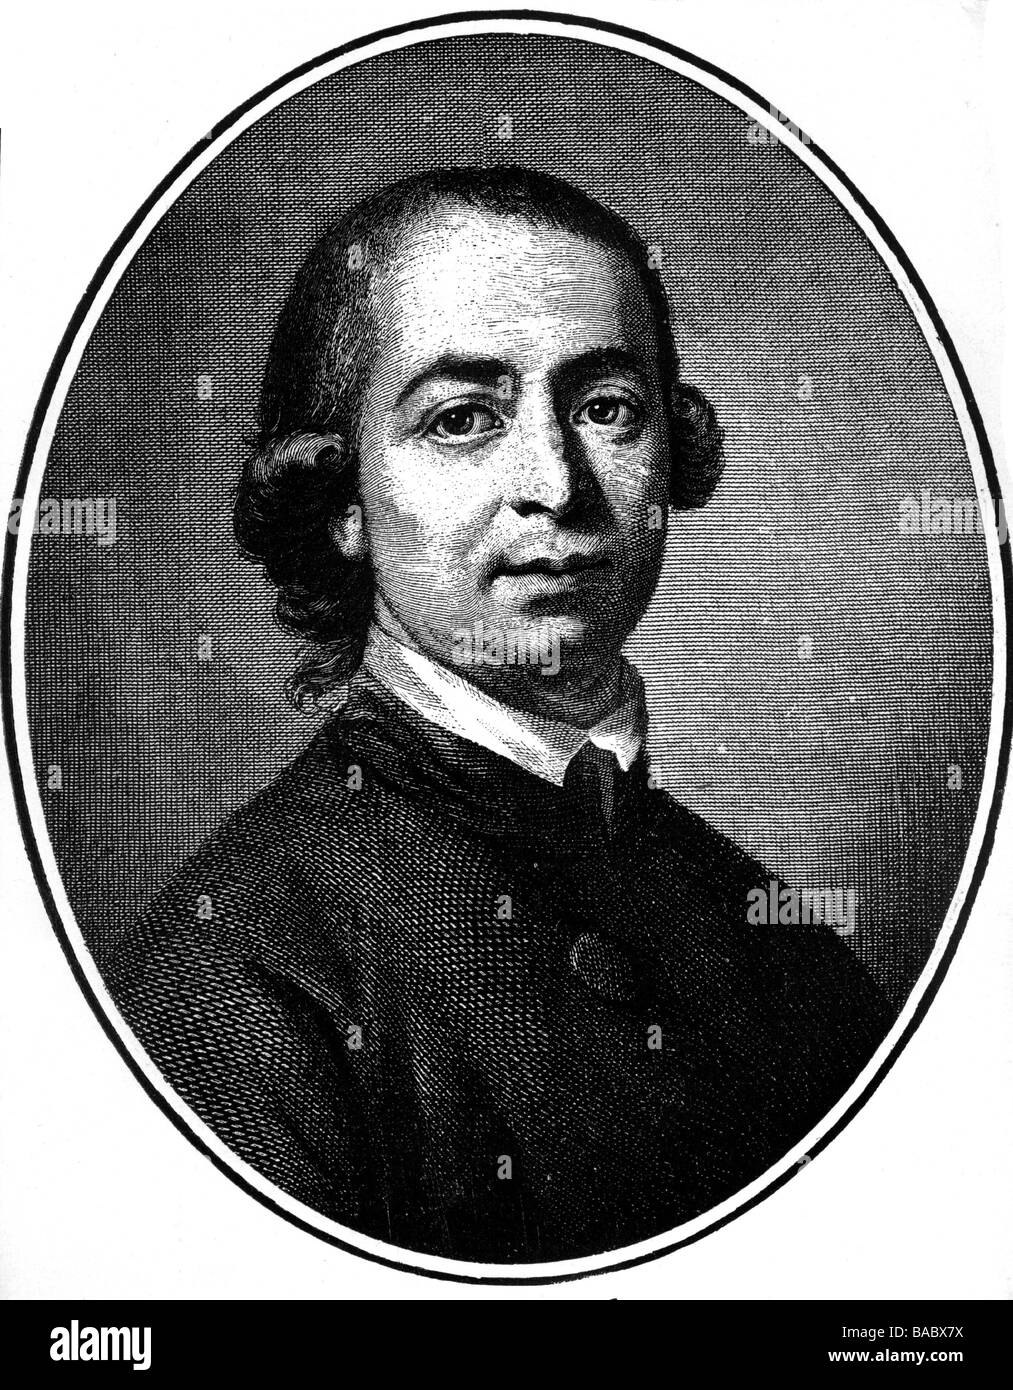 Herder, Johann Gottfried, 25.8.1744 - 18.12.1803, German author / writer and philosopher, portrait, engraving by Lazarus Sichling, after painting by Anton Graff, 1784, Stock Photo